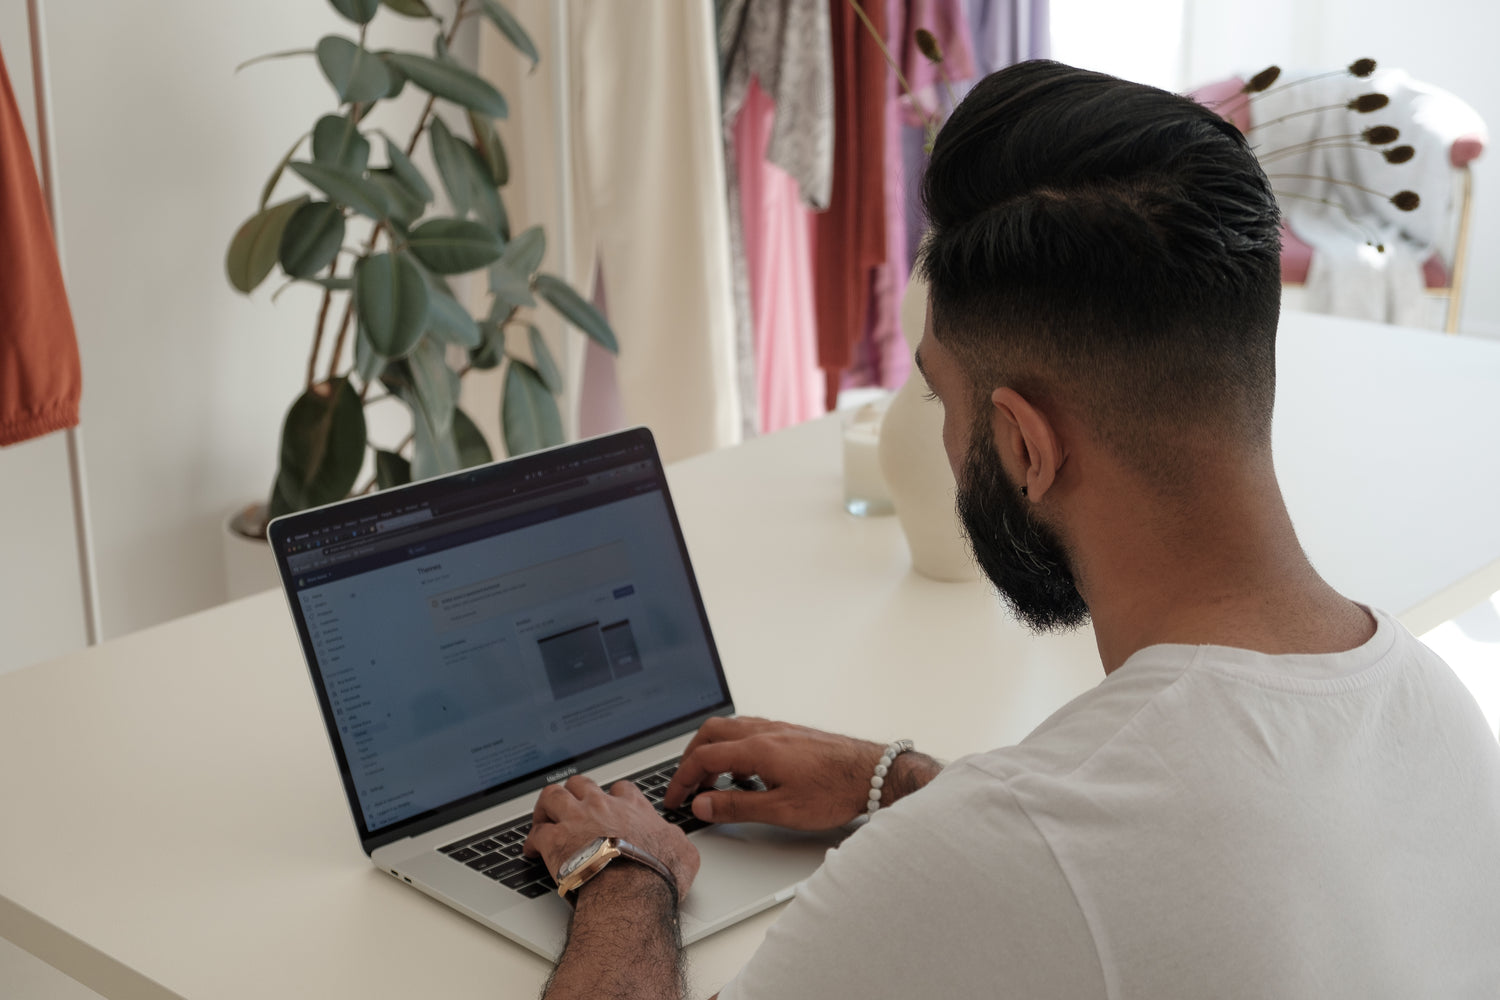 Looking over the shoulder of a man working on his online store on a laptop. There are house plants and clothes hanging in the background. | browse our store to find the perfect items for your enjoyment - storefront for LunaSola Designs